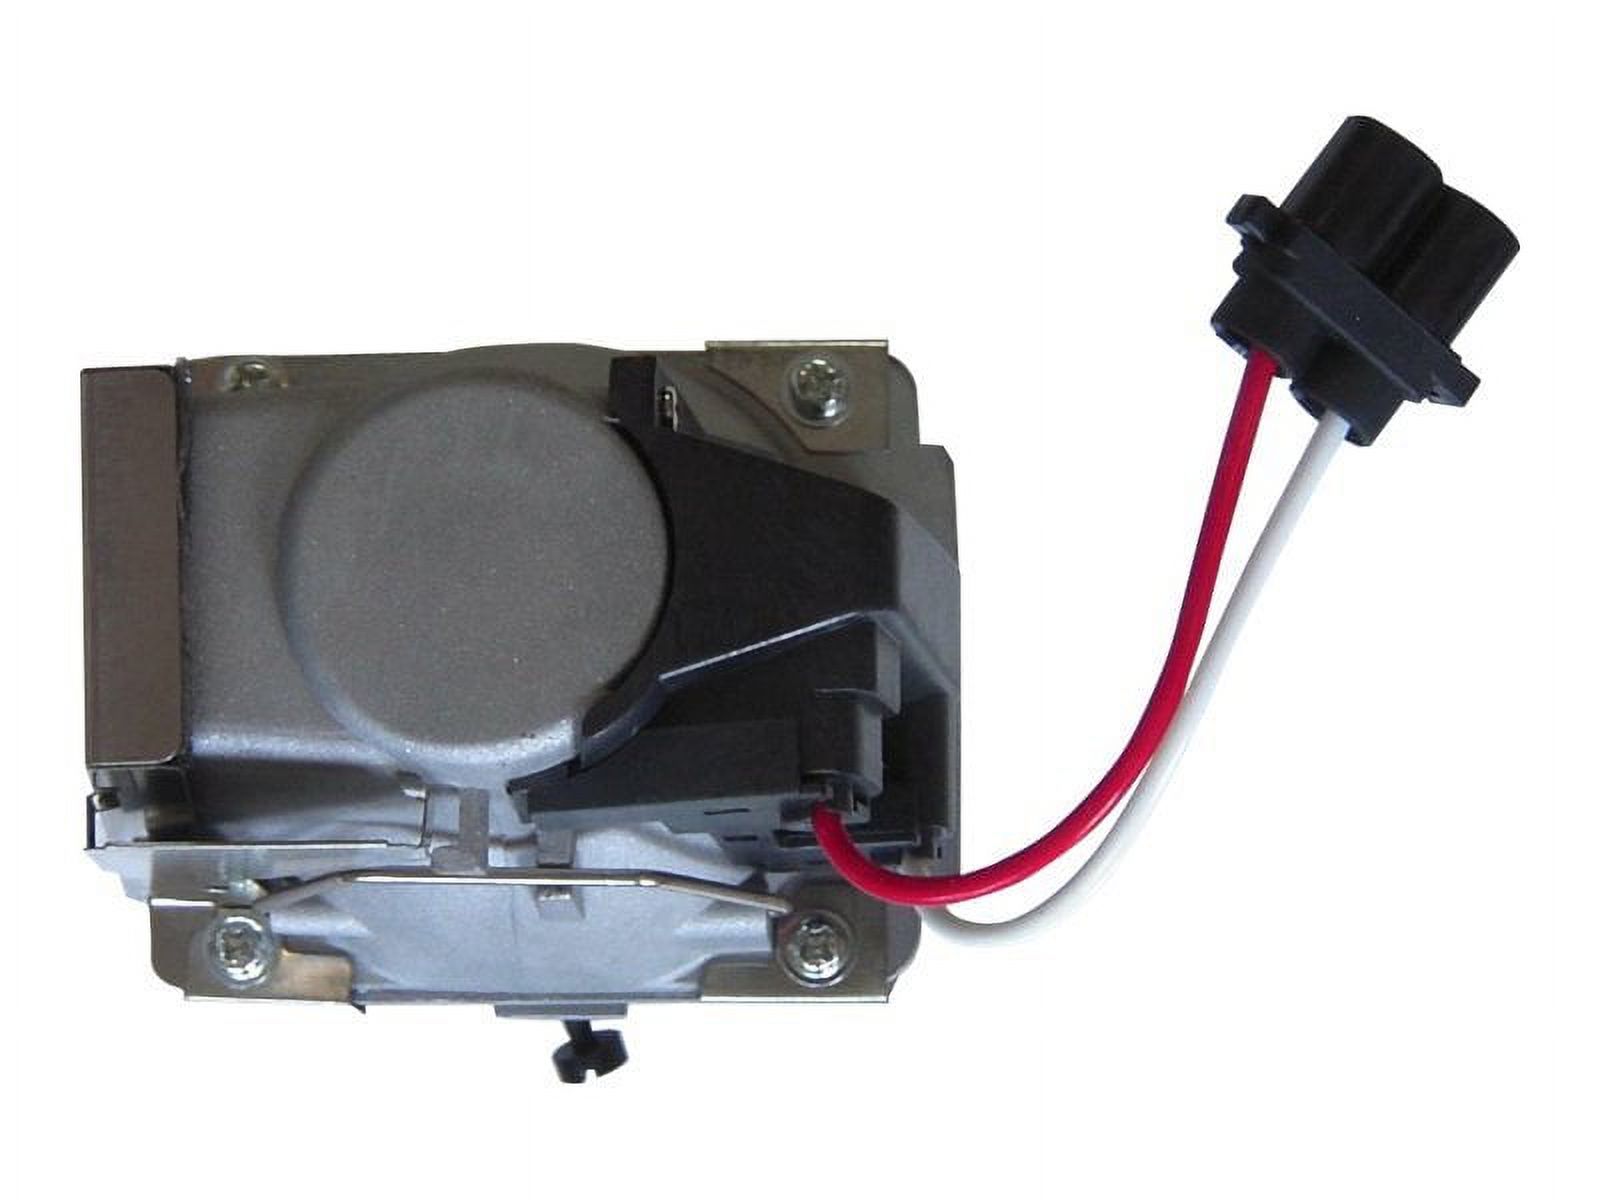 V7 200 W Replacement Lamp for InFocus IN32, IN34, IN34EP Replaces Lamp SP-LAMP-019 - image 2 of 4